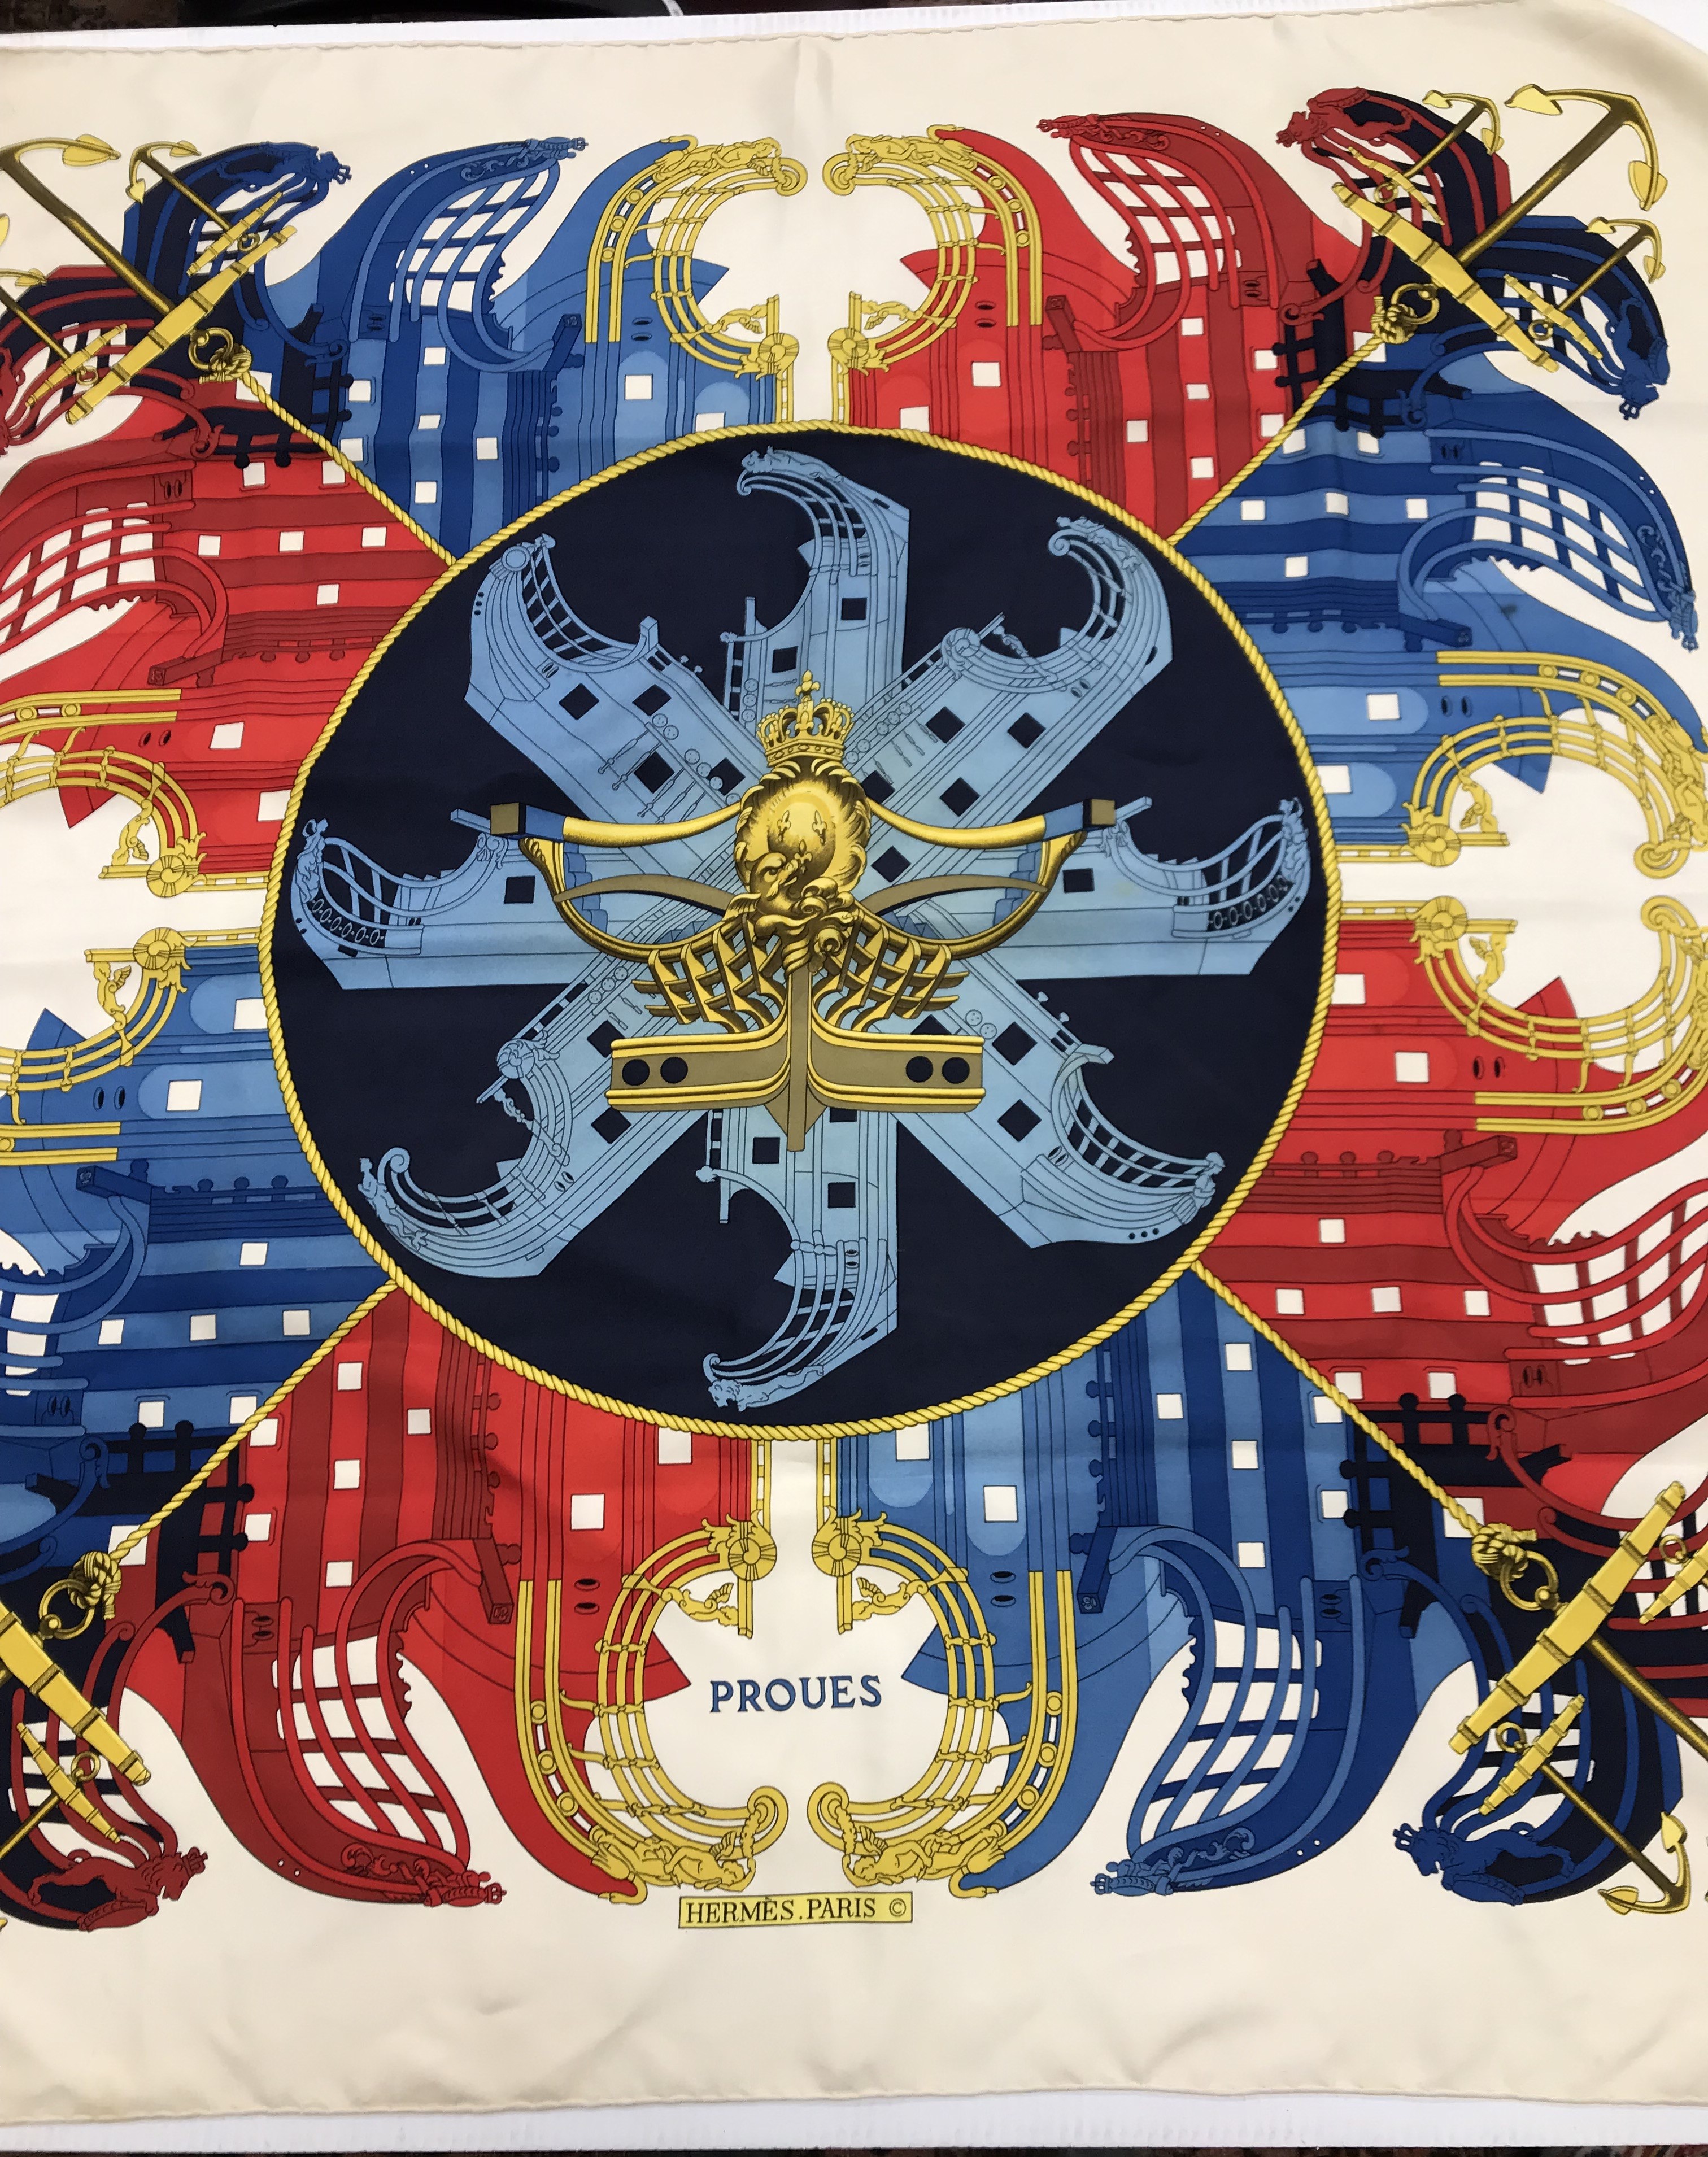 A Hermès silk scarf "Proues" by Philippe